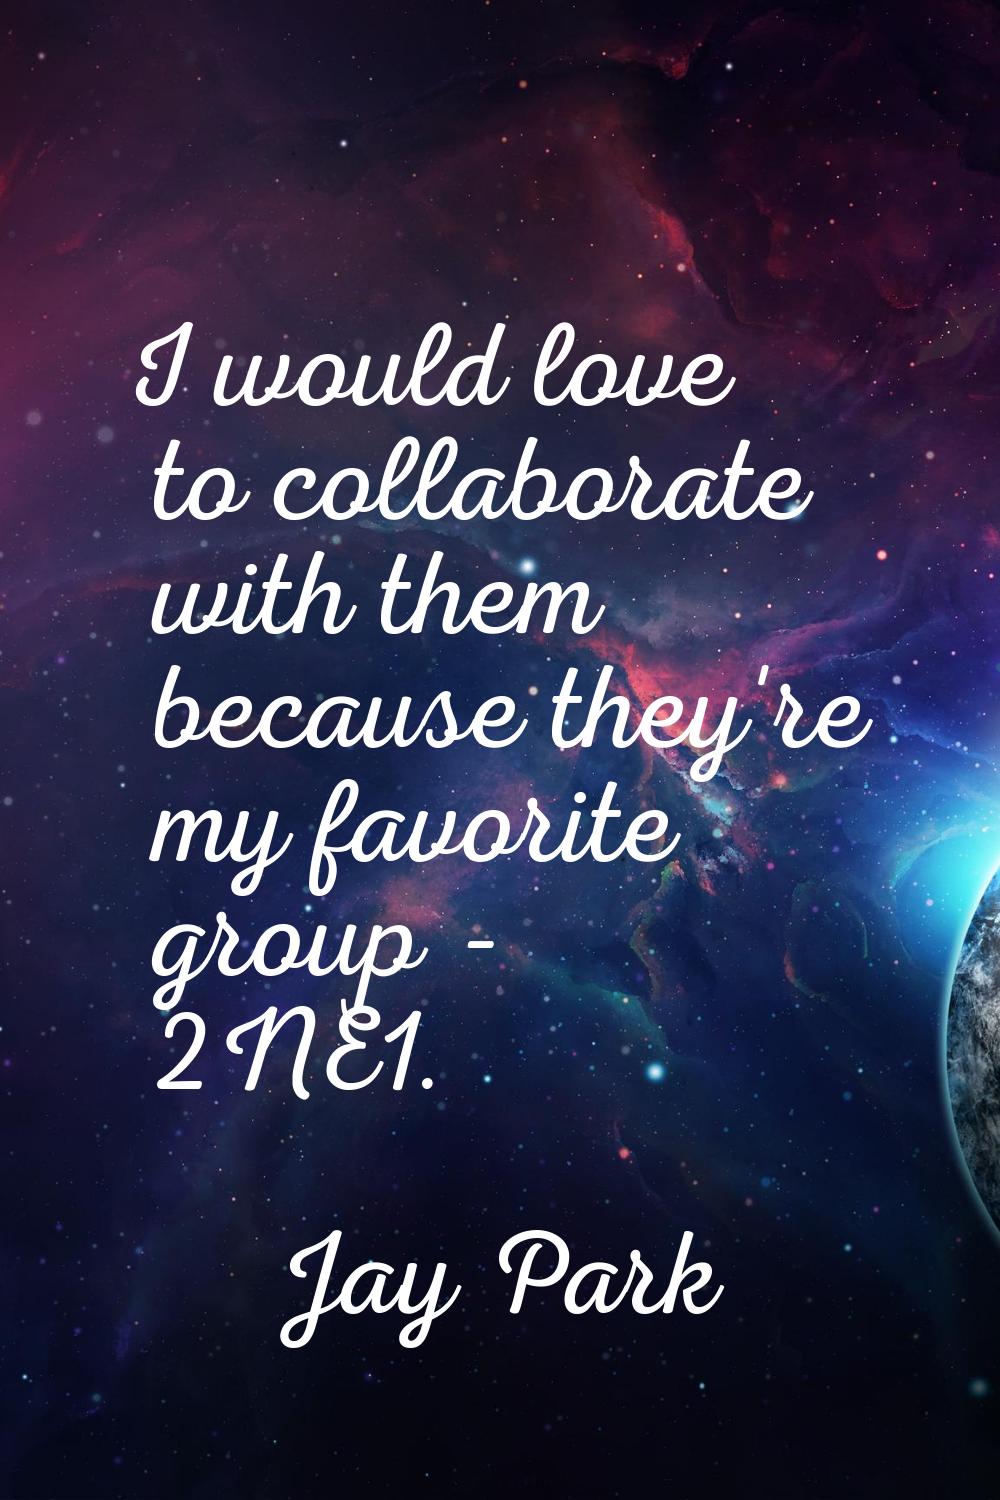 I would love to collaborate with them because they're my favorite group - 2NE1.